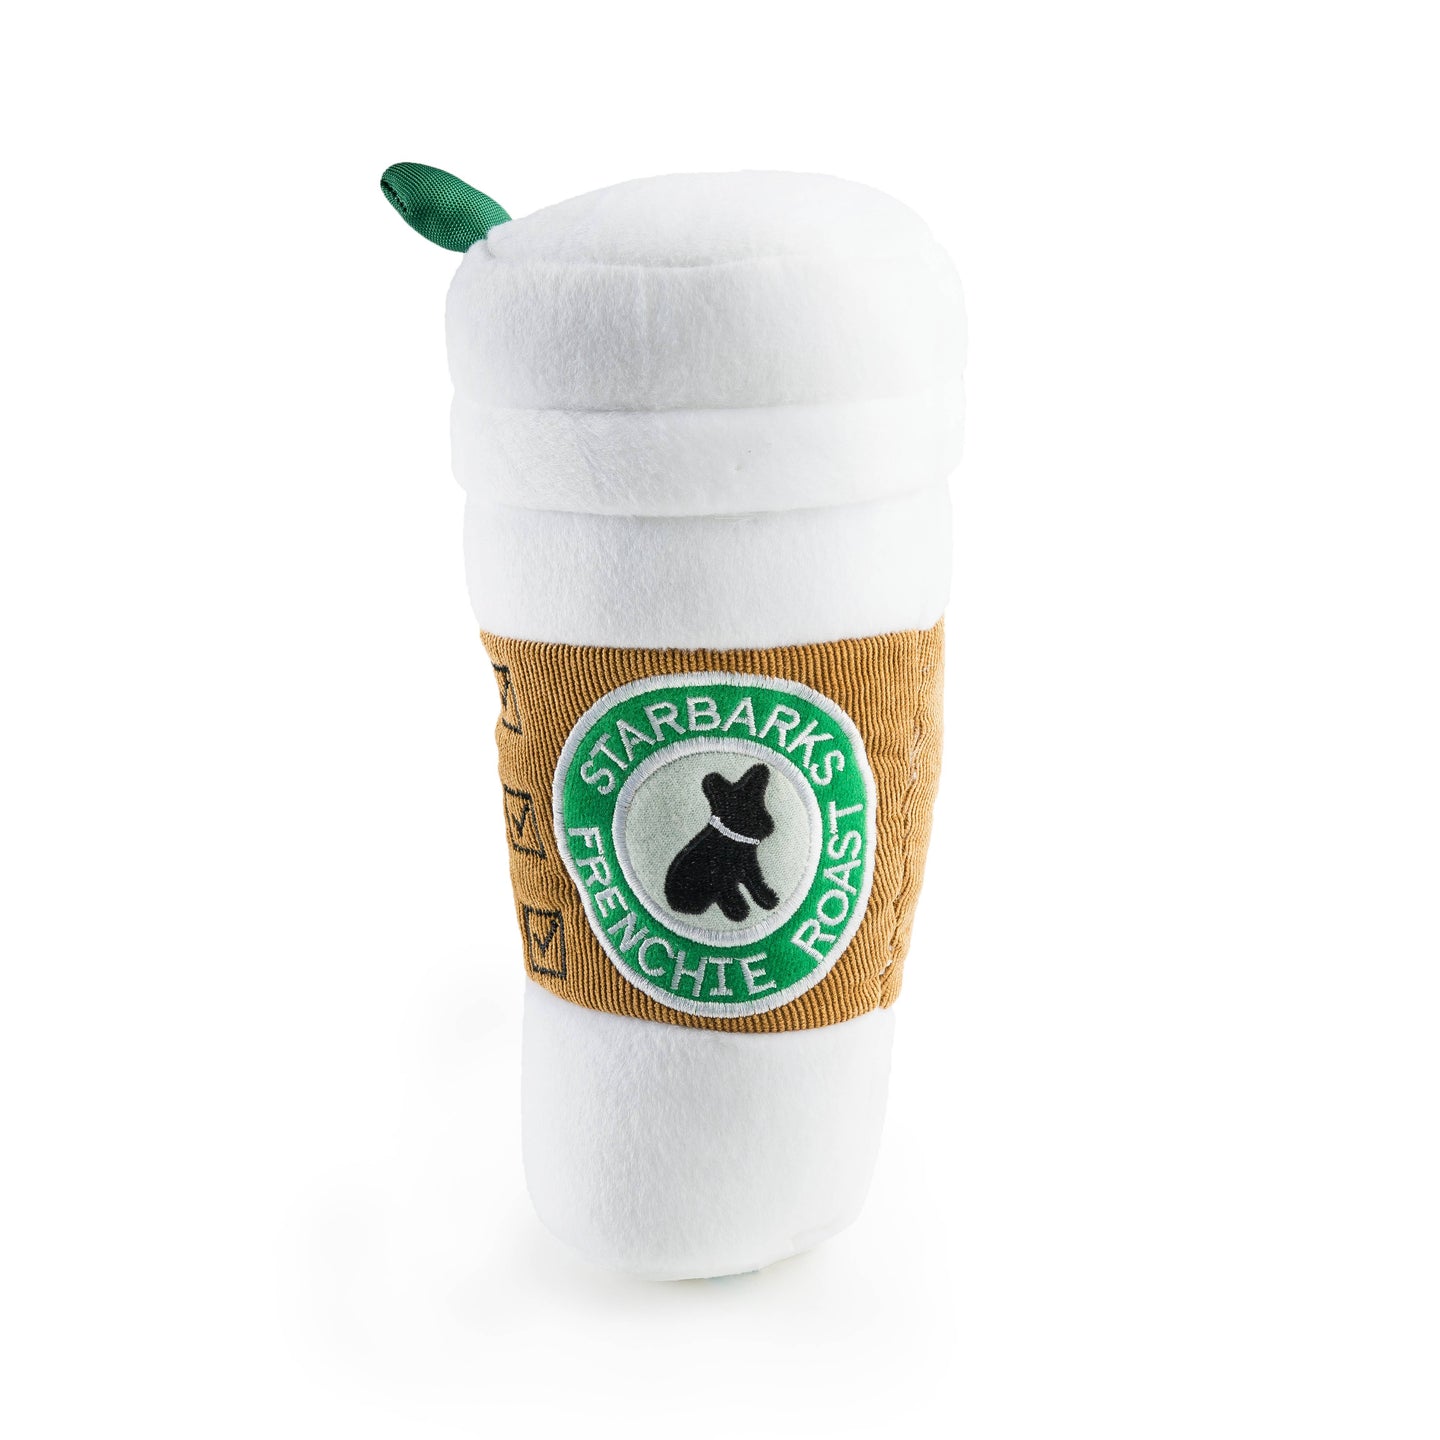 NEW Starbarks Coffee Cup W/ Lid Squeaker Dog Toy: Large